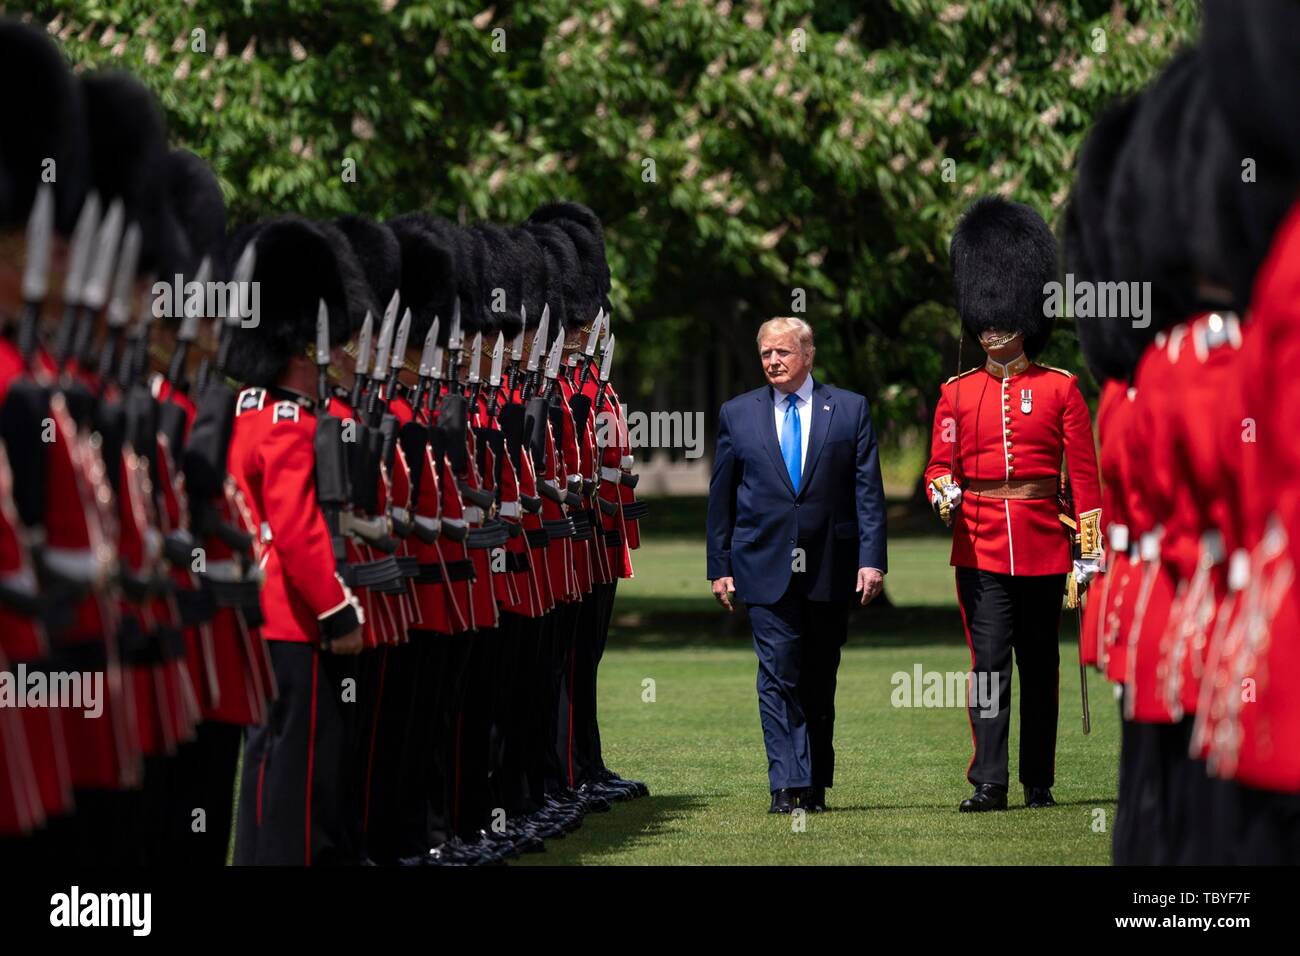 London, UK. 03rd June, 2019. U.S President Donald Trump escorted by the HRH Prince Charles inspect the Queens Guard during an official welcome ceremony at Buckingham Palace June 3, 2019 in London, England. Credit: Planetpix/Alamy Live News Stock Photo